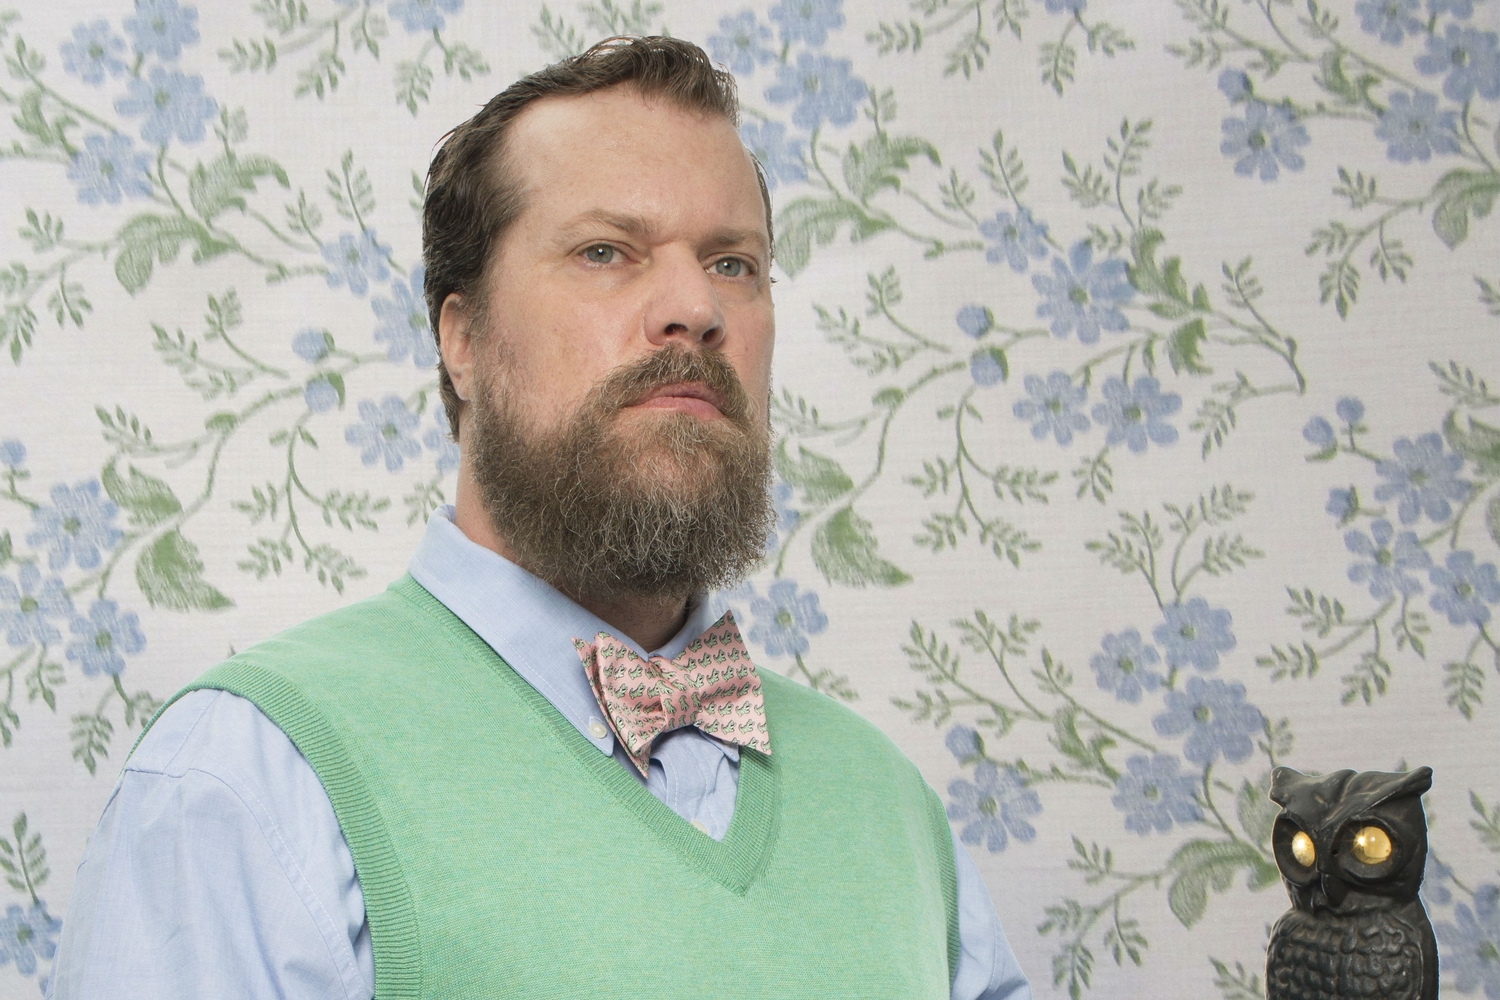 John Grant: "What got me into addiction was the constant need to escape from my reality"